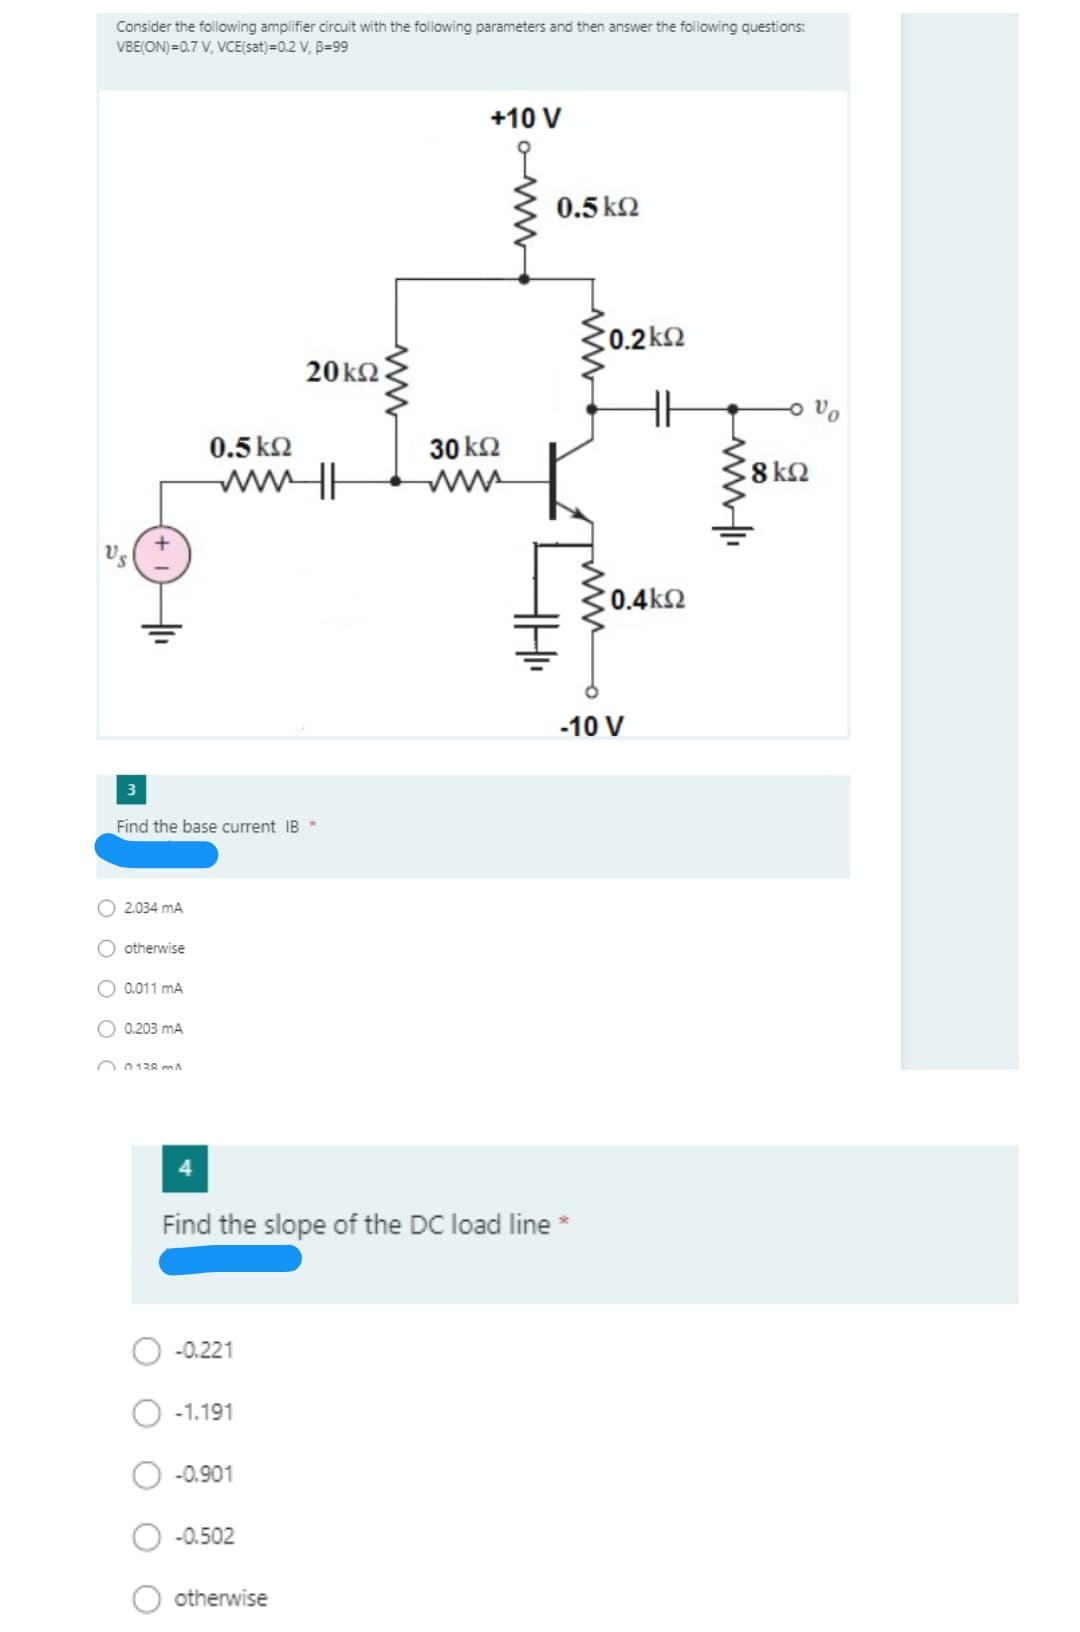 Consider the following amplifier circuit with the following parameters and then answer the following questions:
VBE(ON)=0.7 V, VCE(sat)=0.2 V, B=99
+10 V
0.5 k2
C0.2k2
20k2.
0.5 k2
30 k2
ww H
C0.4k2
-10 V
3
Find the base current IB *
O 2.034 mA
O otherwise
O 0.011 mA
O 0.203 mA
O 0138 mn A
Find the slope of the DC load line *
-0.221
-1.191
-0.901
-0.502
otherwise
